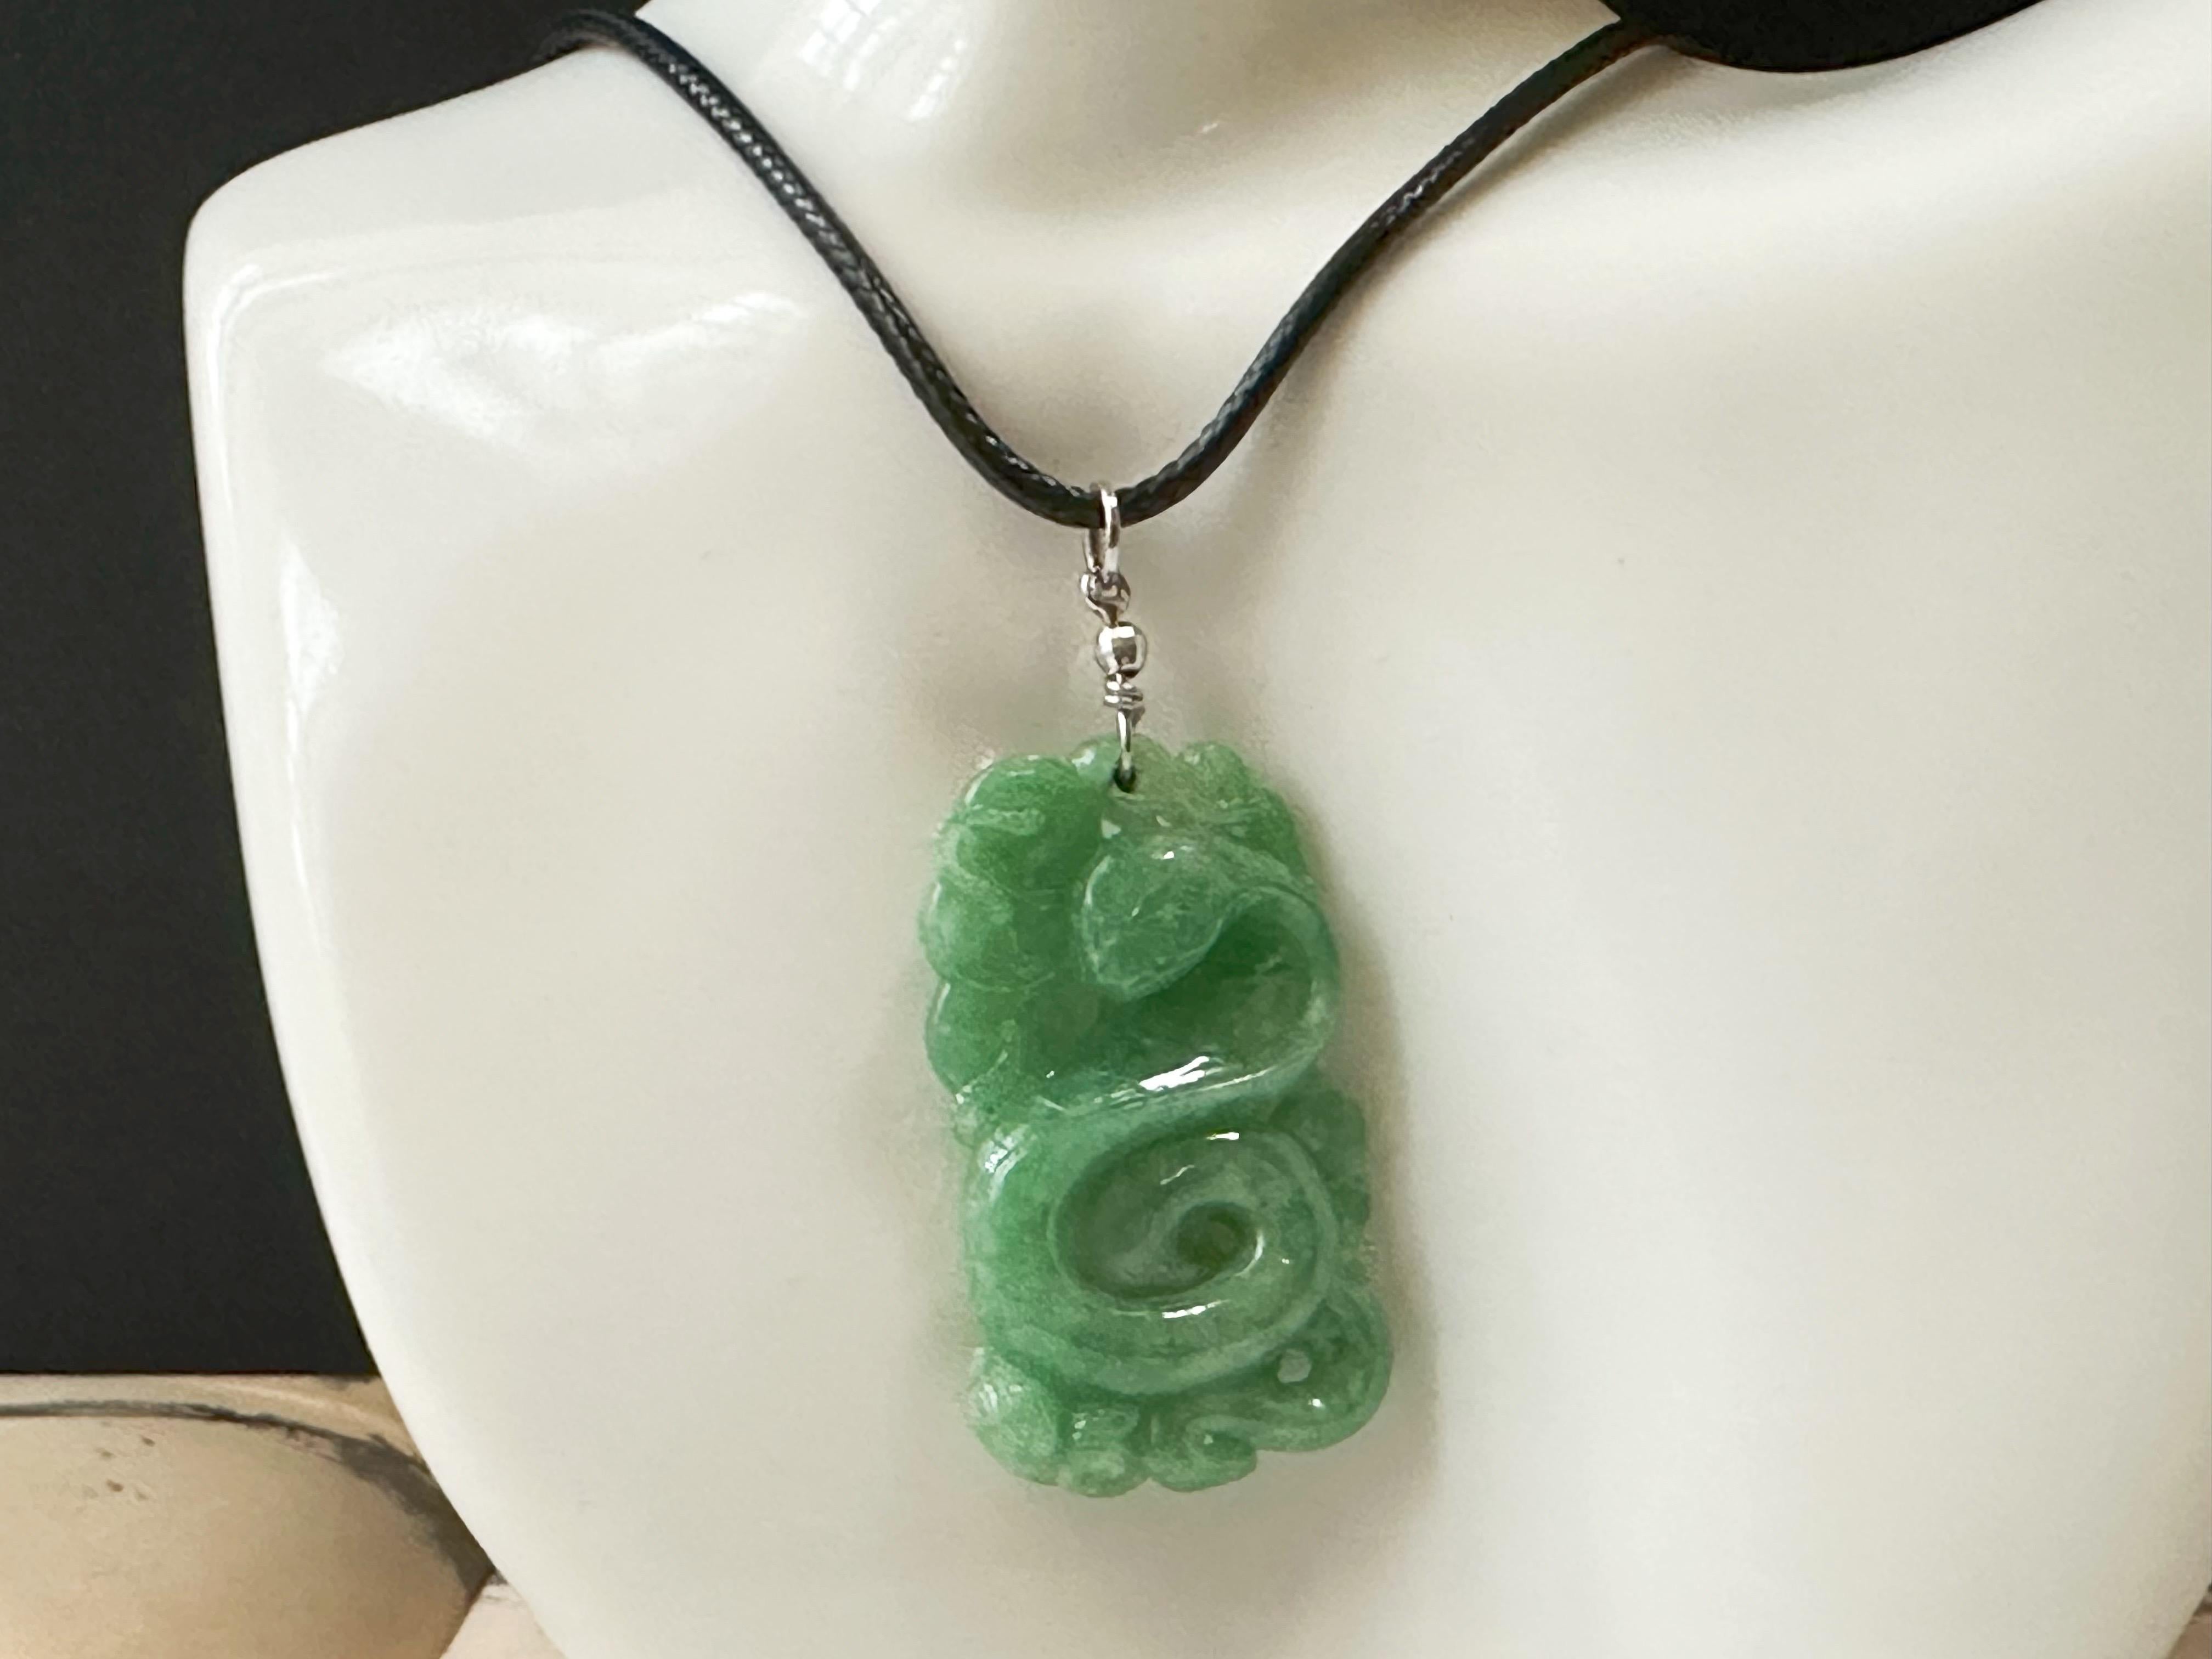 This jade pendant is 100% natural, untreated, and undyed Type-A Myanmar jadeite jade. It is hand-carved into a snake and ancient coins. The beautiful apple green color Mother Nature gifted makes this pendant unique and attractive. This pendant has a